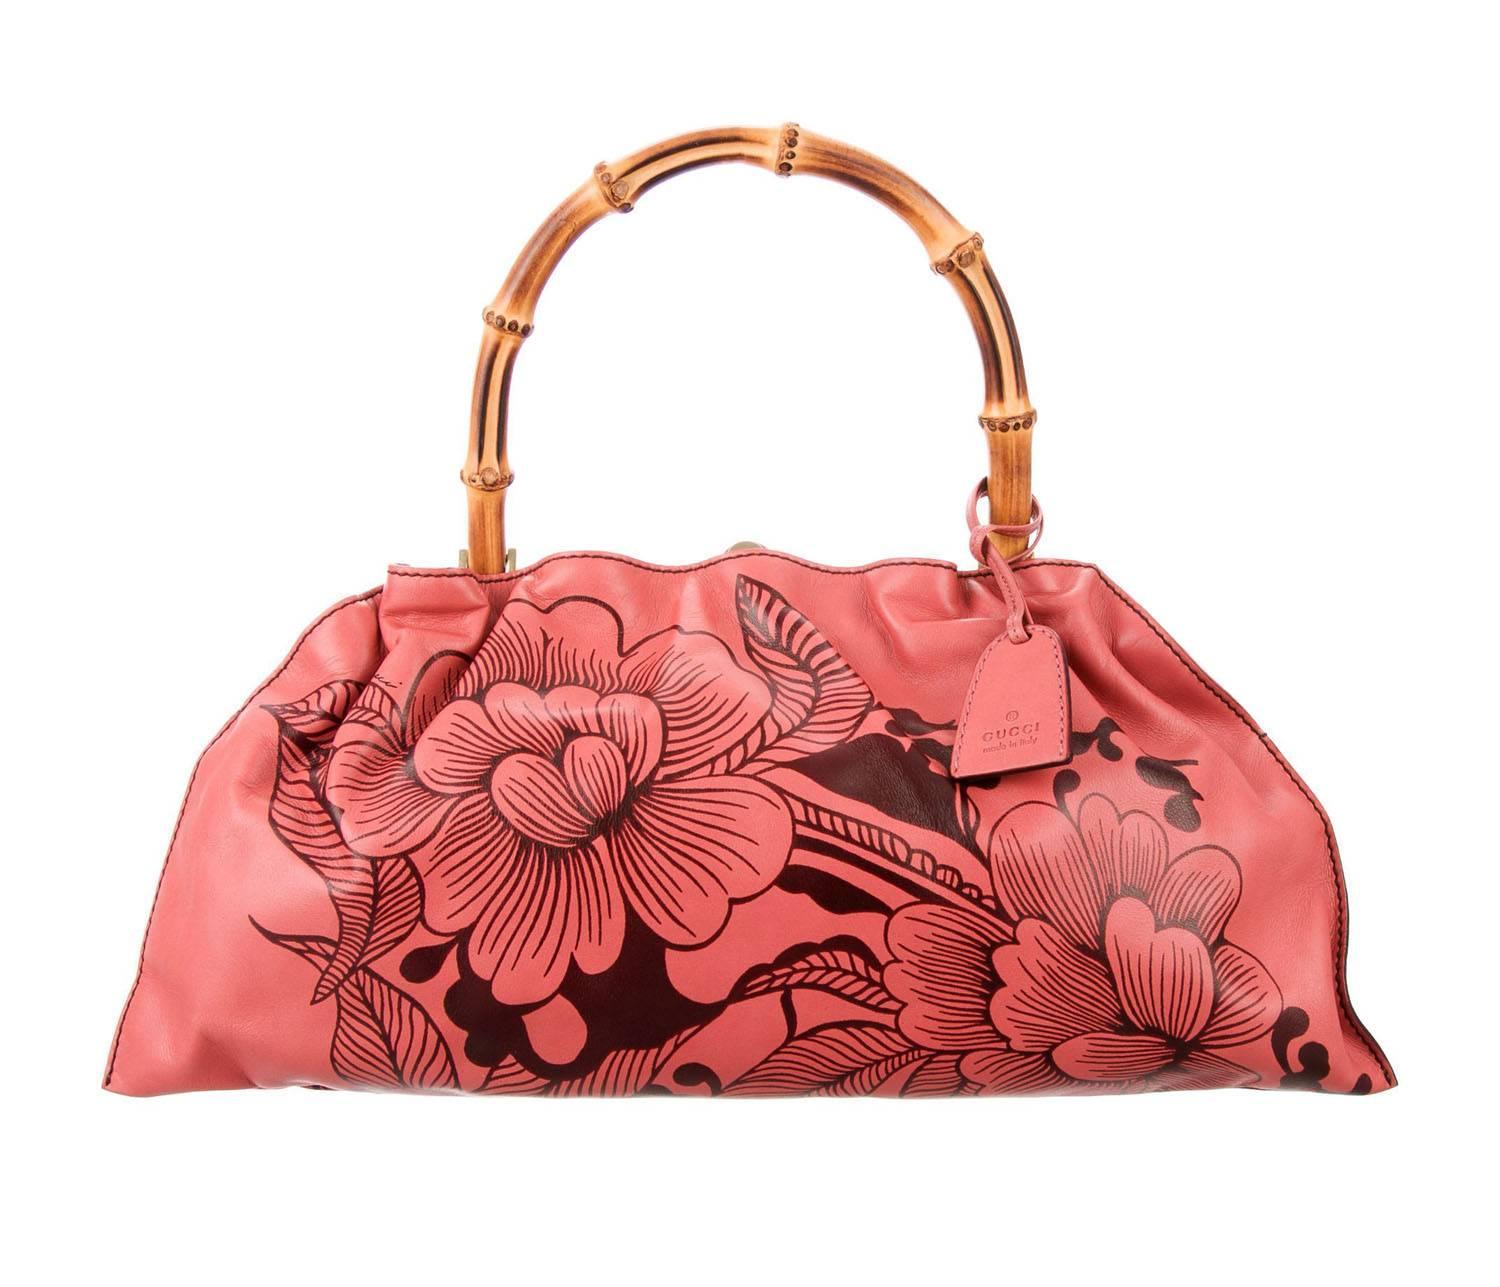 Tom Ford for Gucci Leather Coral Floral Bamboo Handbag
S/S 2003 Collection
Coral and brown leather with gold-tone hardware. Single bamboo top handle. Floral pattern throughout. Chocolate brown woven lining. Single slit pocket at interior wall and